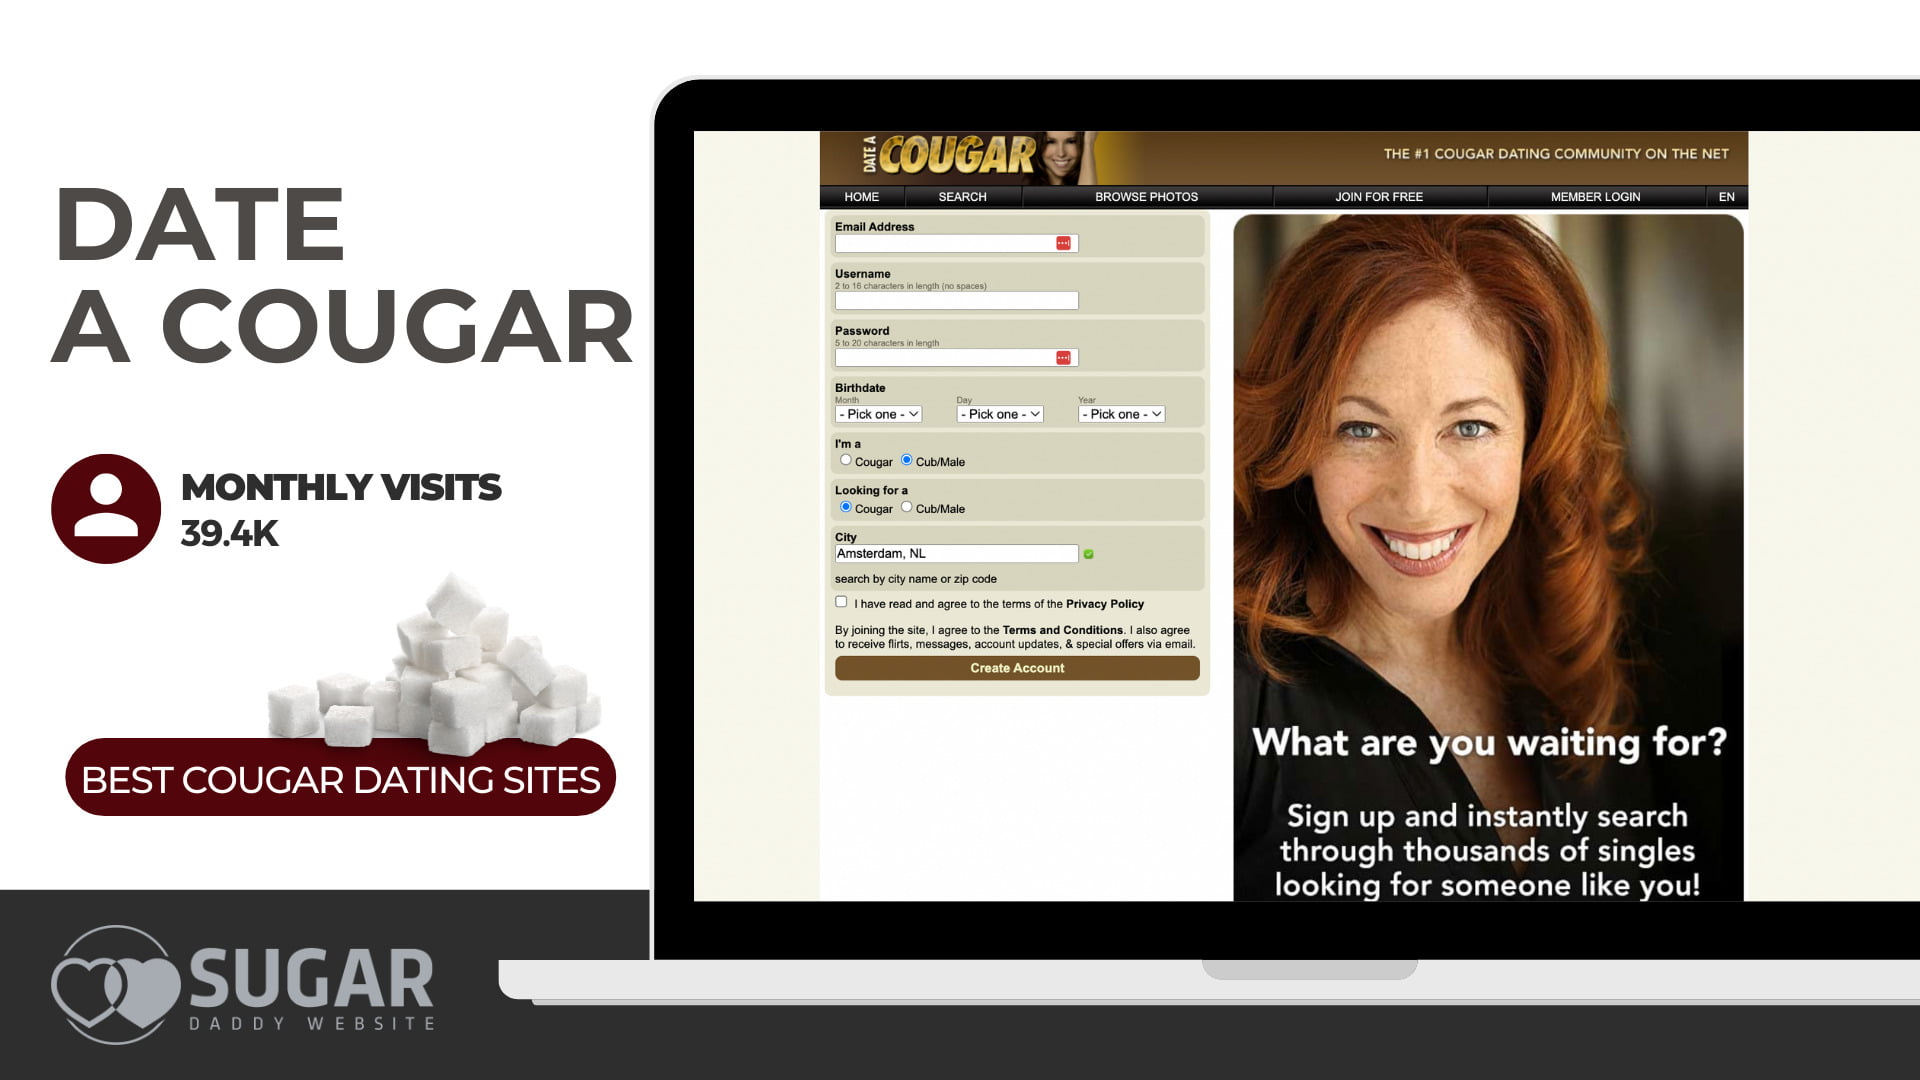 Cougar Dating Site - Date A Cougar
